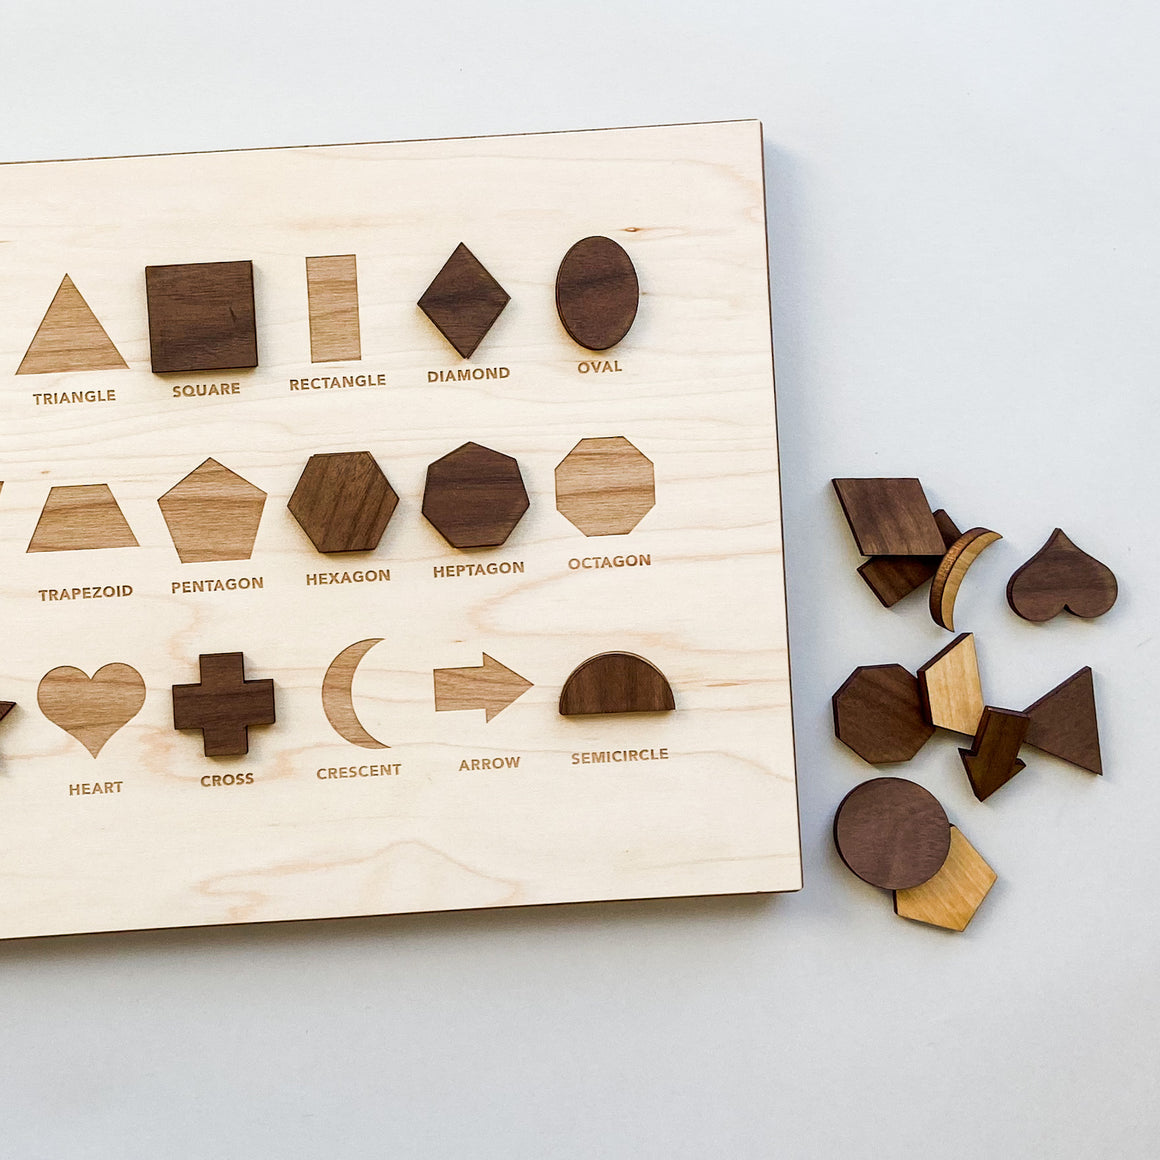 Wooden Shapes Board With Matching Shapes